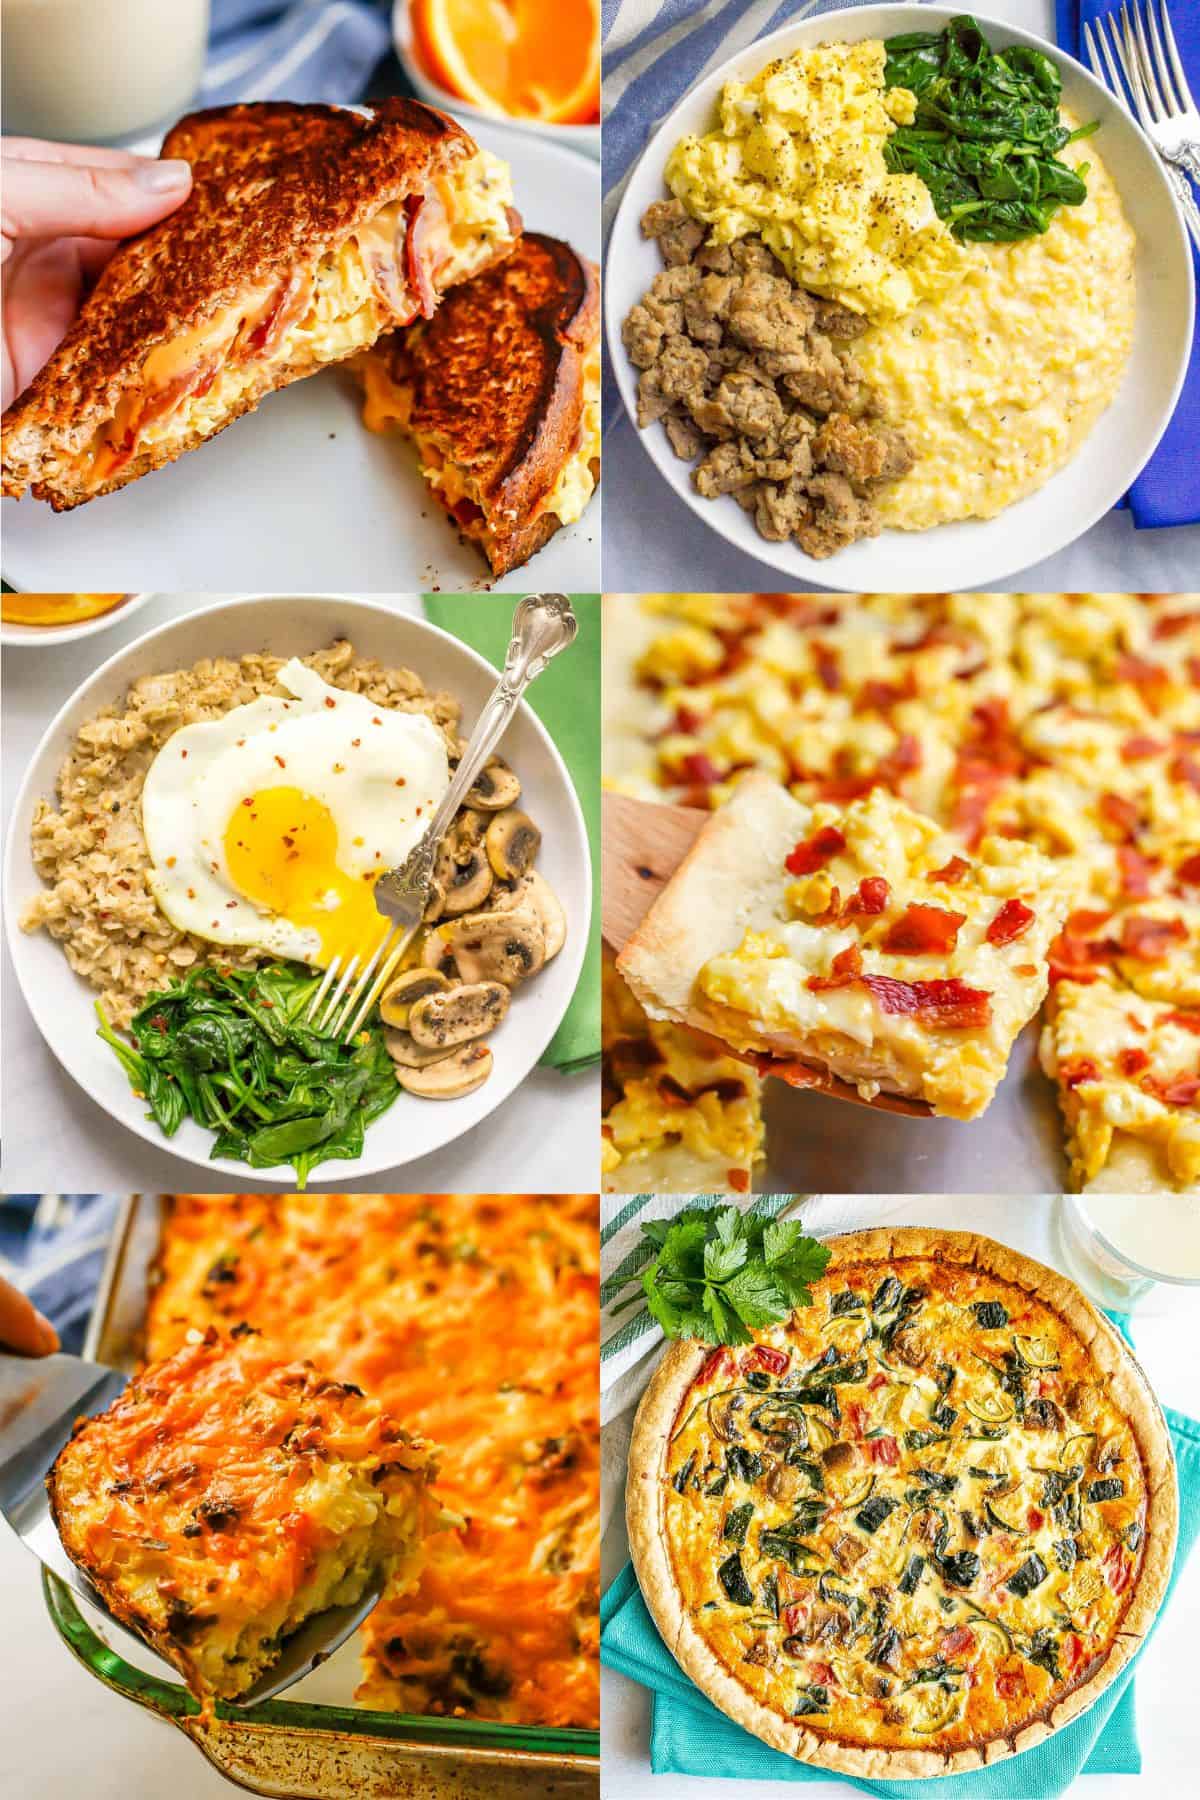 A collage of six different breakfast for dinner recipes, including a sandwich, oatmeal bowl, casserole, frittata, breakfast pizza and savory grits bowl.